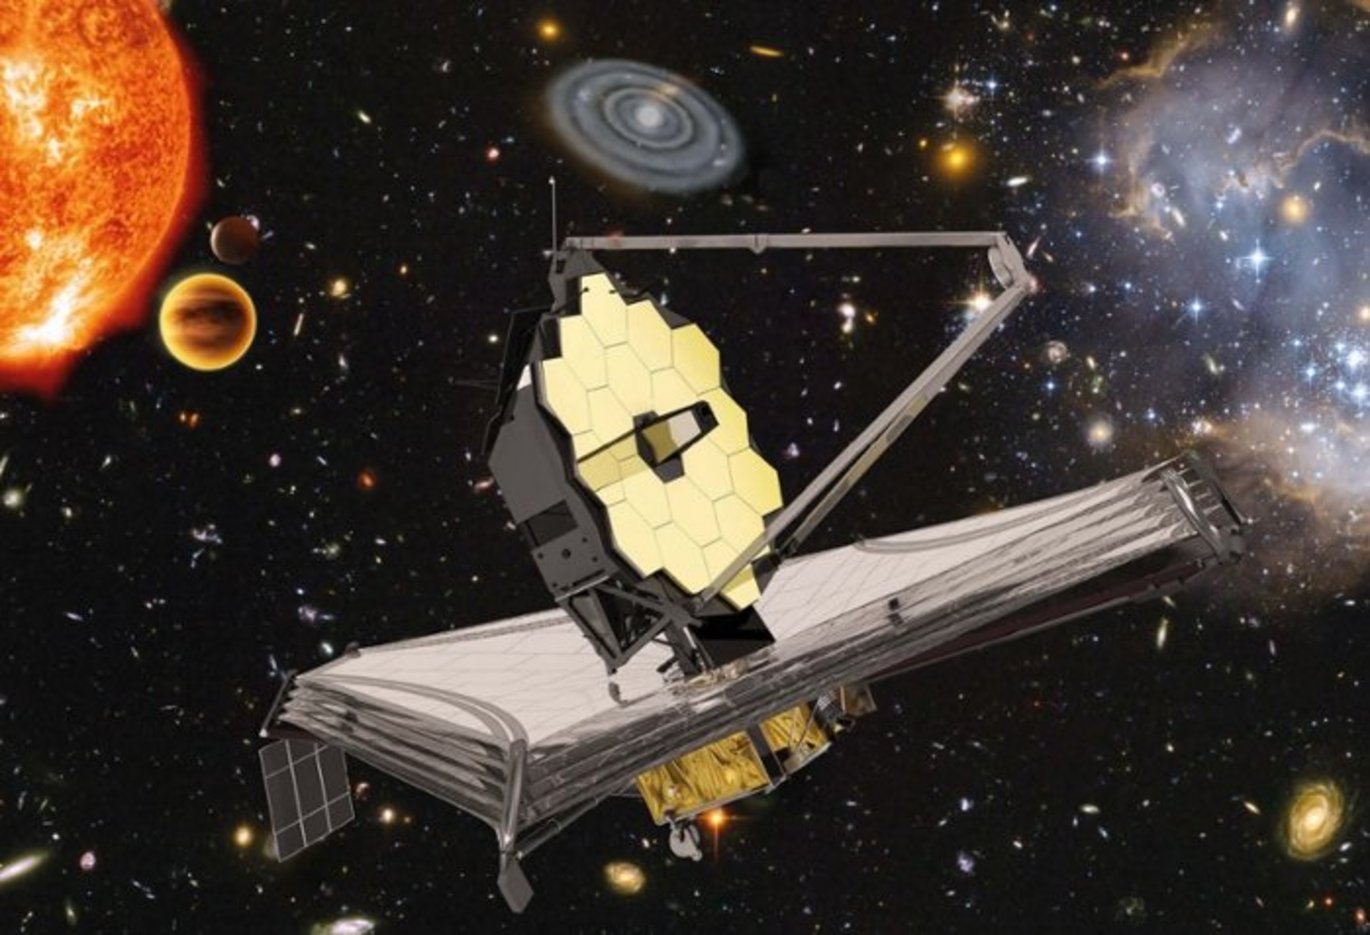 Artist impression of the James Webb Space Telescope in space